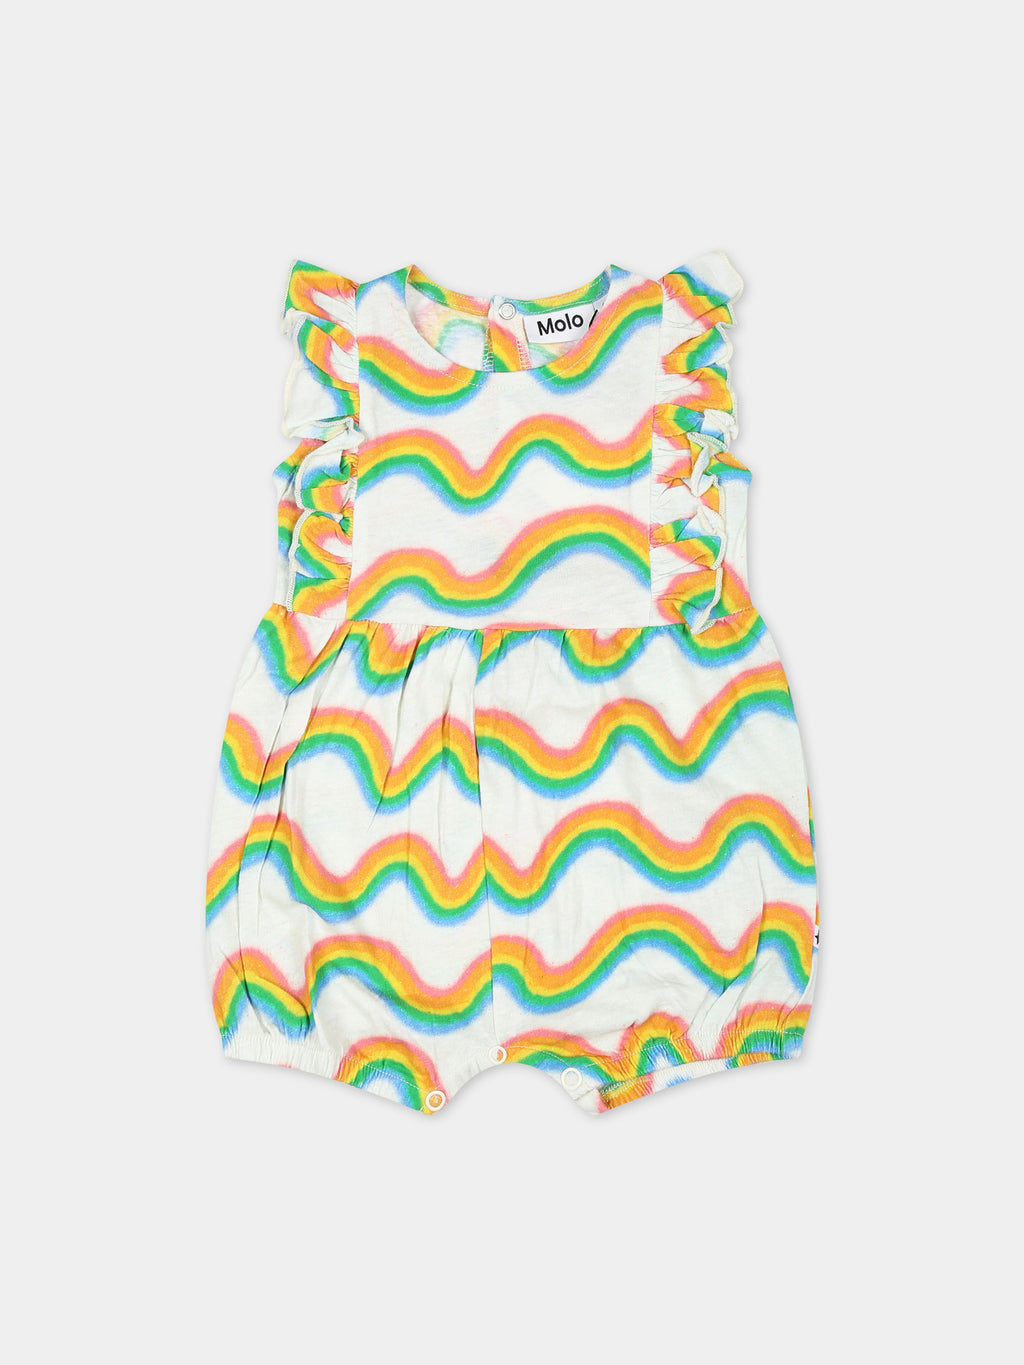 White romper for baby girl with rainbow print